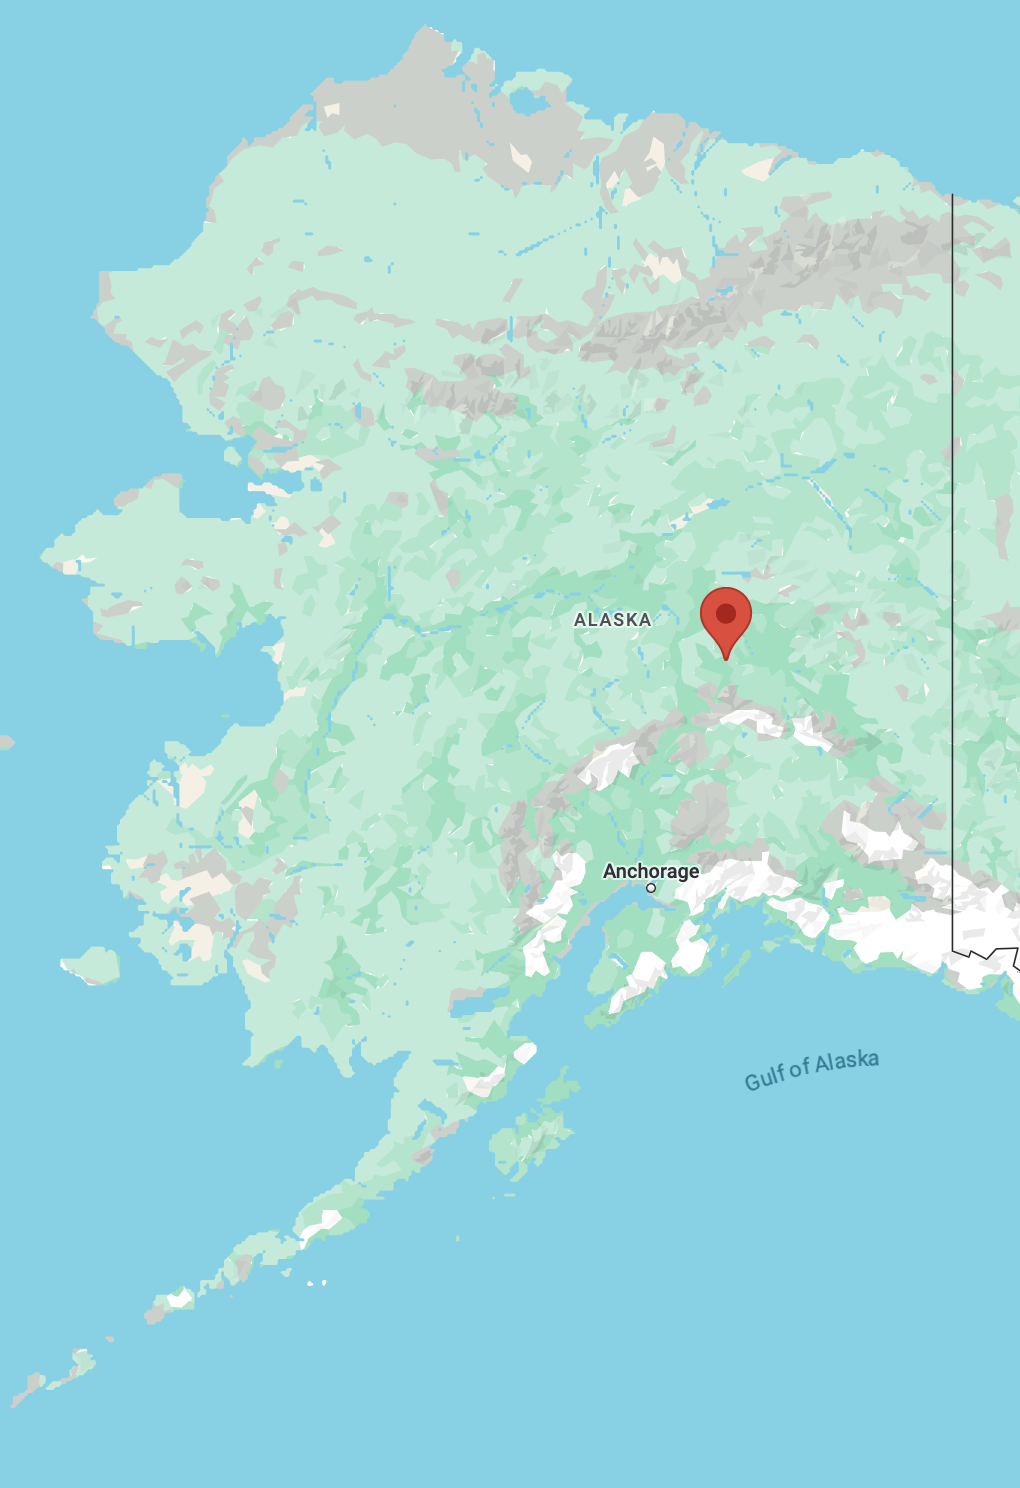 A map of Alaska, with a pin in Fairbanks, near the center of the state.